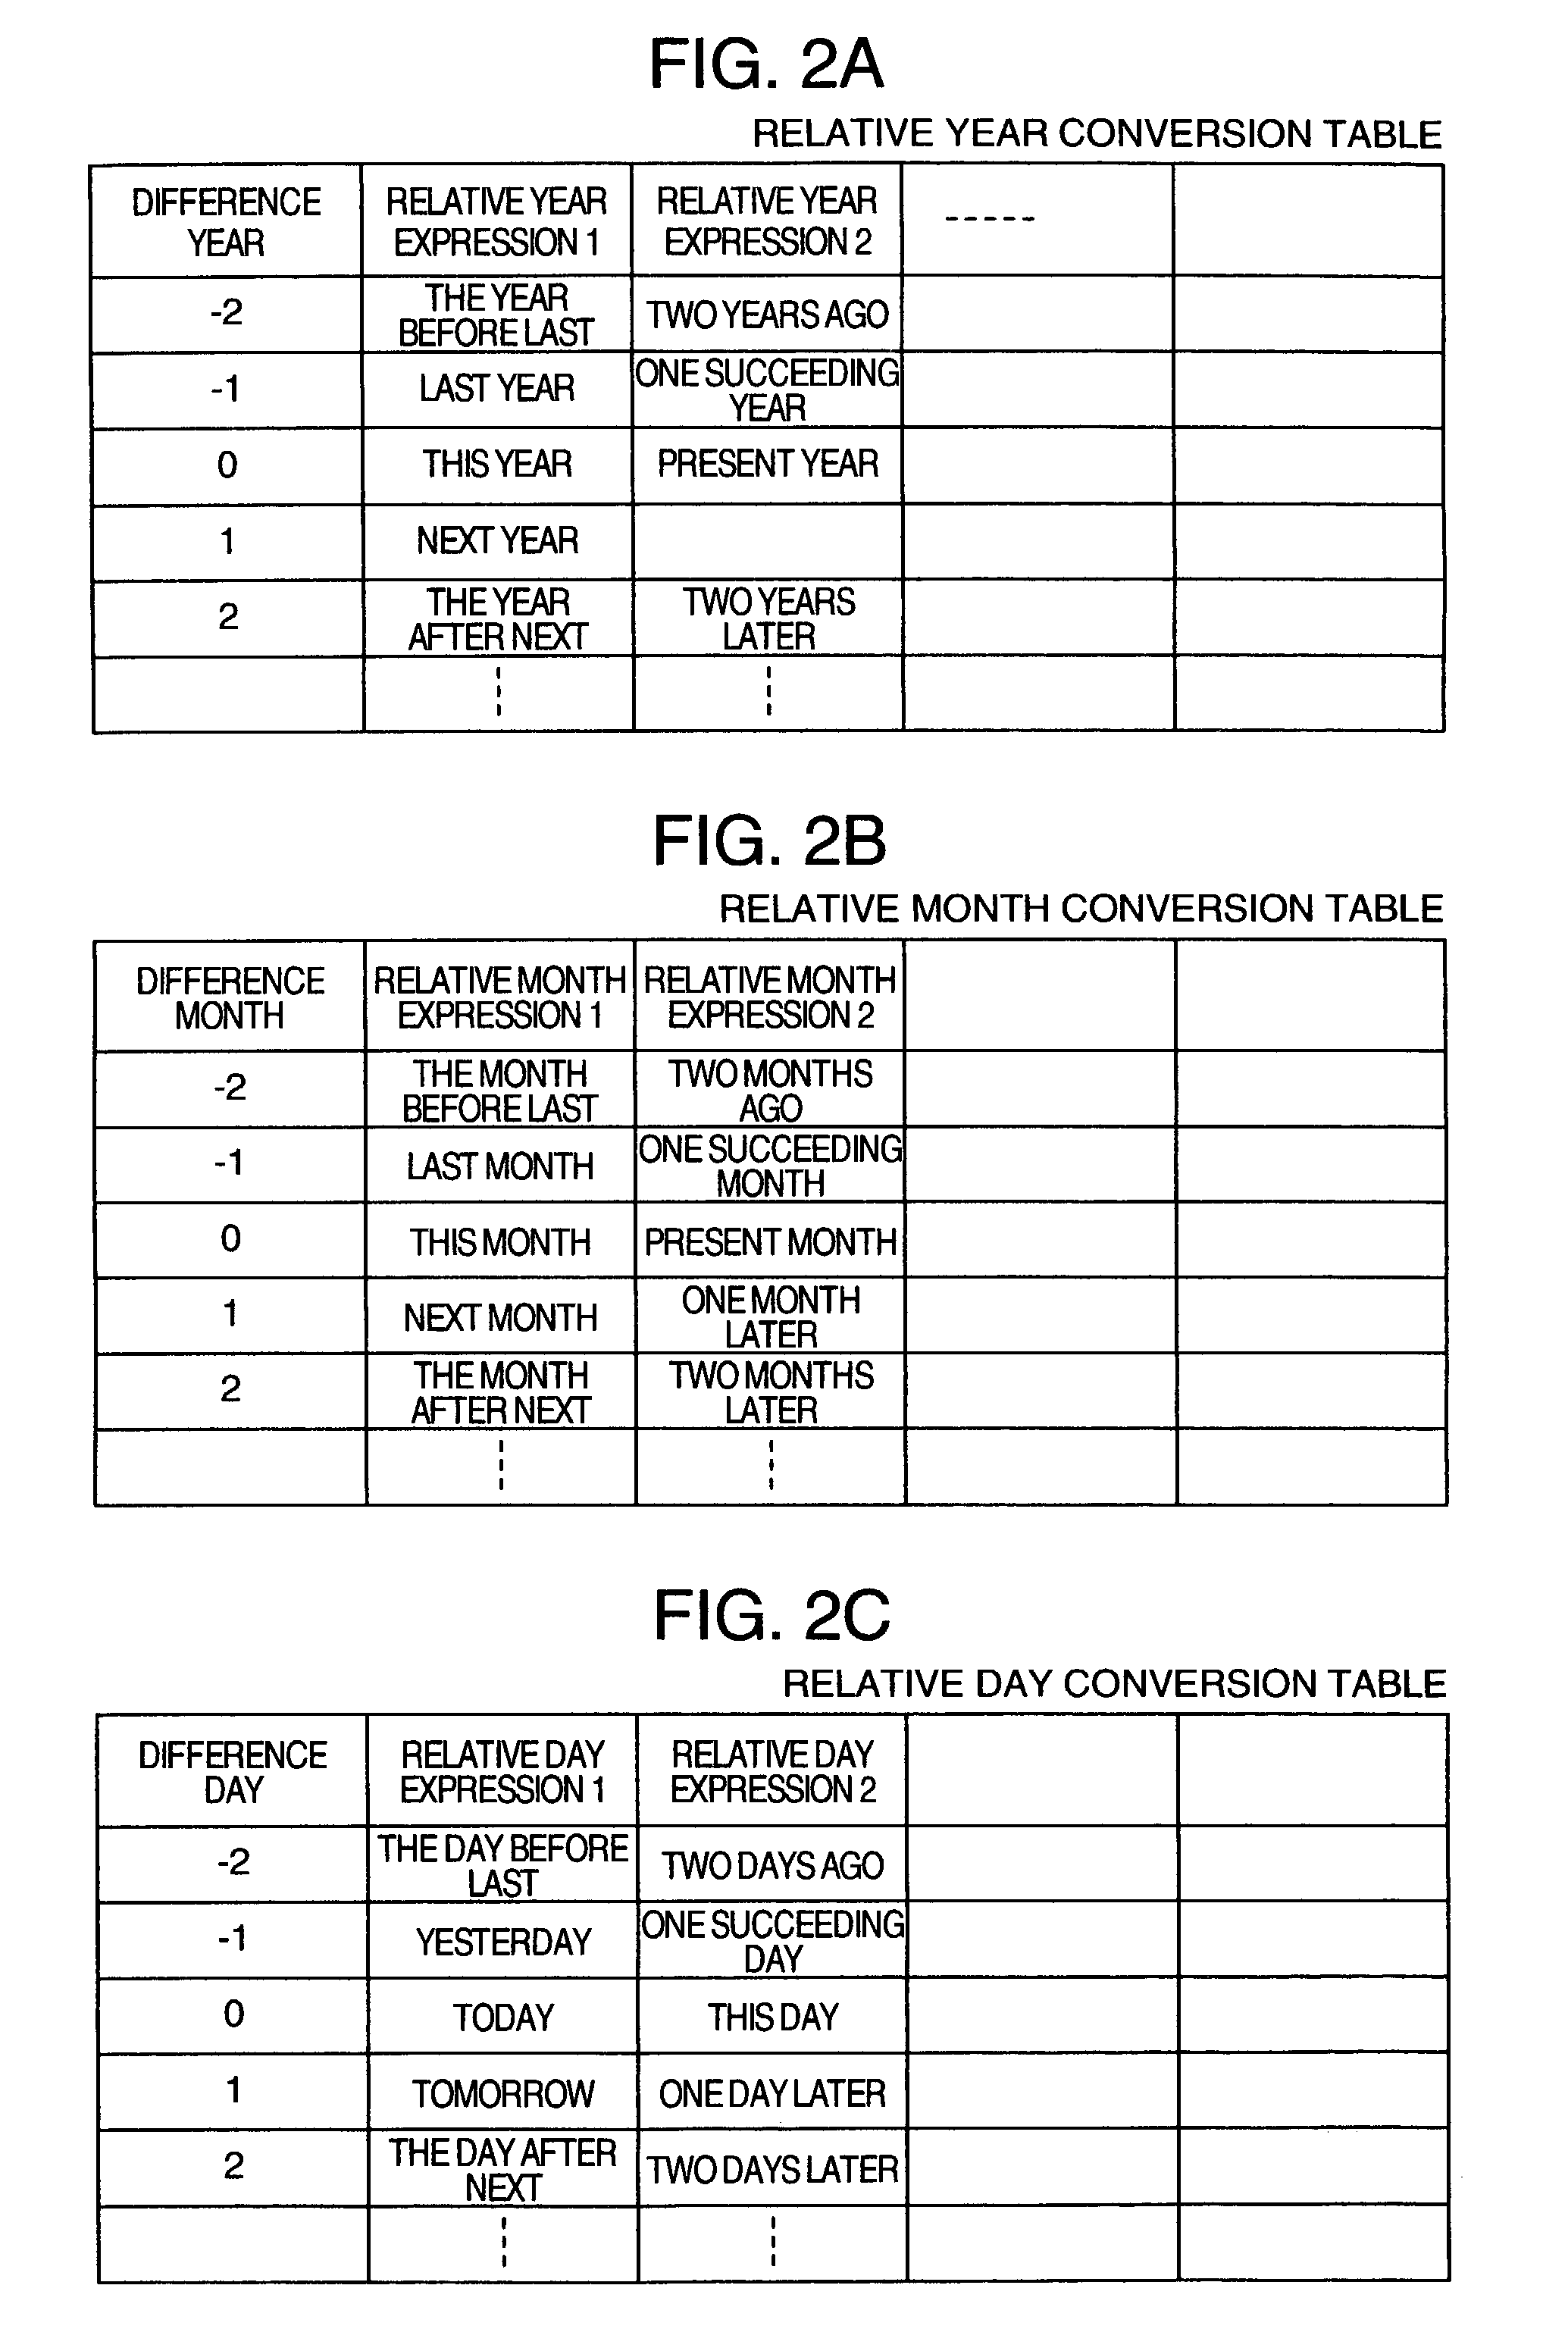 Time information display system